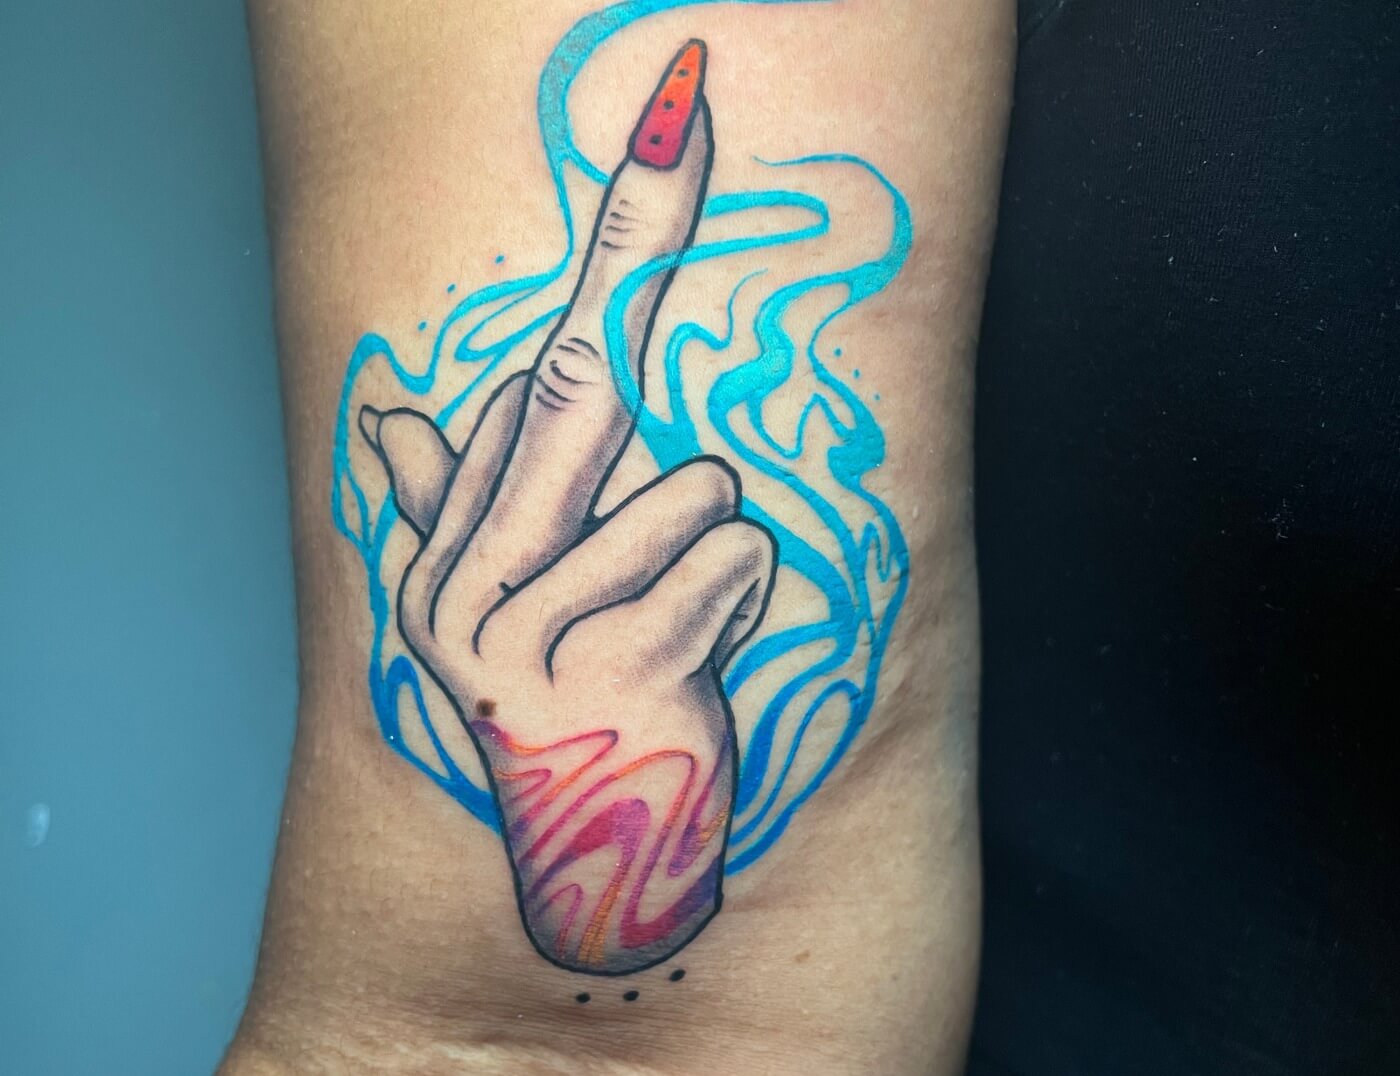 Funky Middle Finger Tattoo With Water Colors By Funk Tha World At Iron Palm Tattoos in downtown Atlanta's Castleberry Art district. Funk specializes in color tones and clean or fine line tattooing on any color tone. Call 404-973-7828 or stop by for a free consultation with Funk or any Iron Palm body artist. Walk Ins are welcome during our business hours.